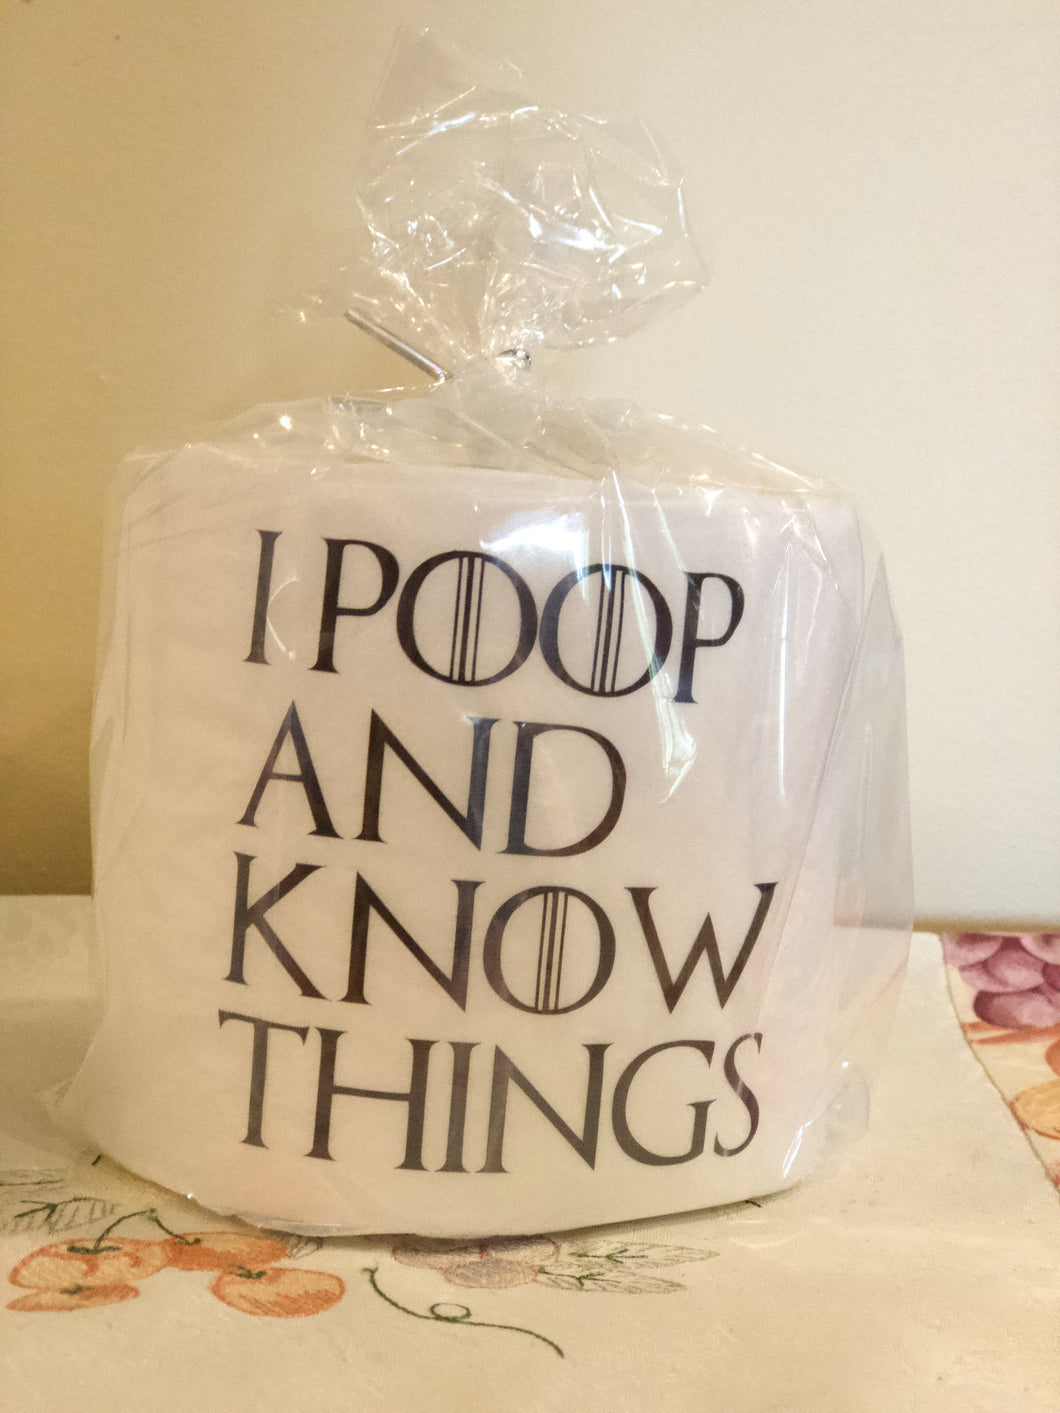 I Poop and Know Things, Game of Thrones Gag Toilet Paper, Funny Toilet Paper, Gag Toilet Paper, Gag Gift, Funny TP Roll, GOT Fans